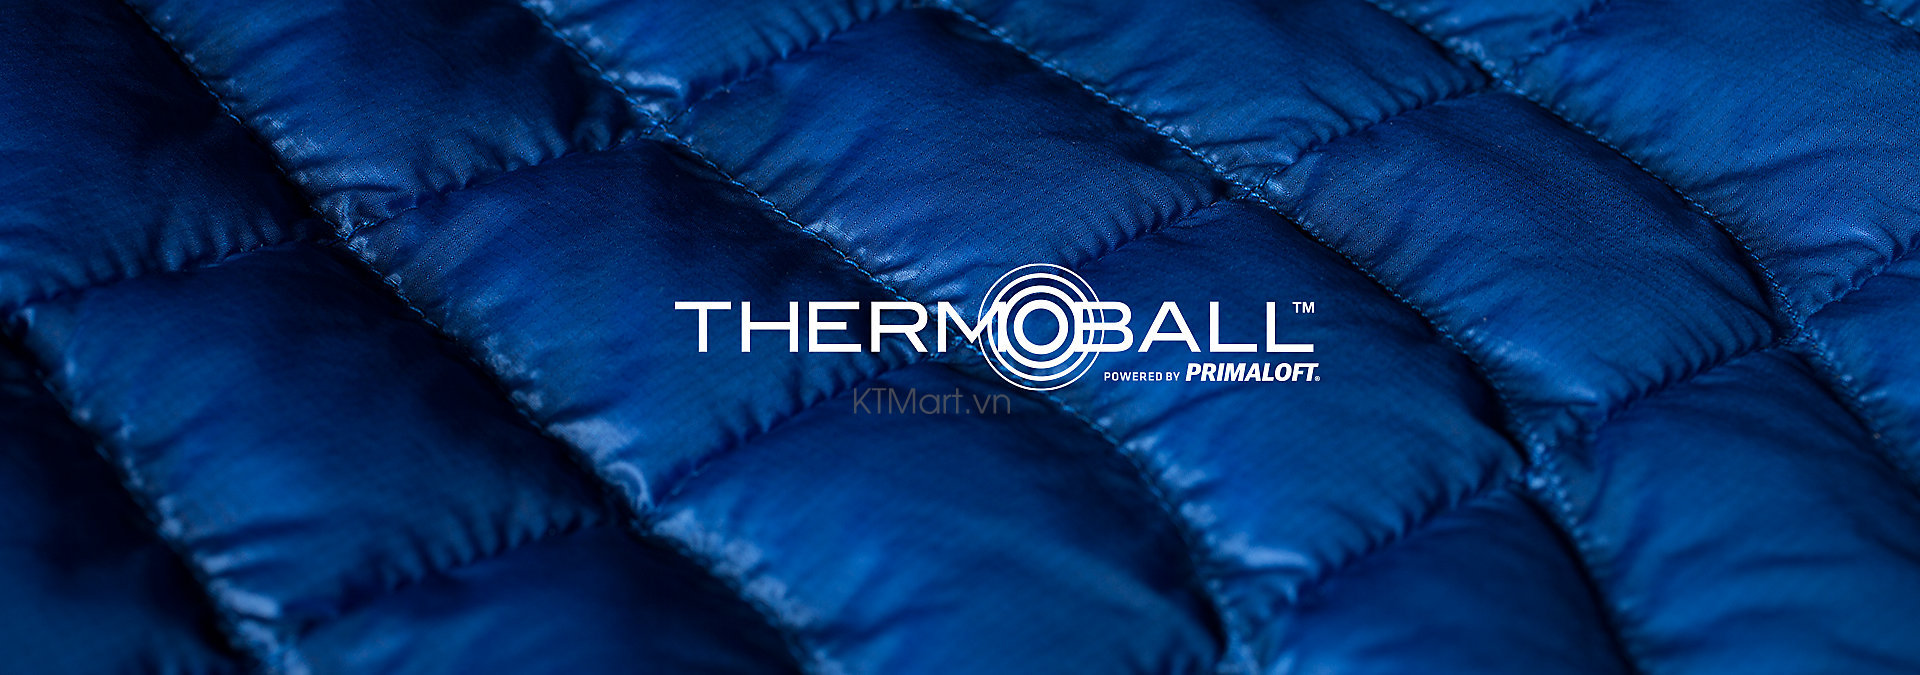 Thermoball The North Face ktmart